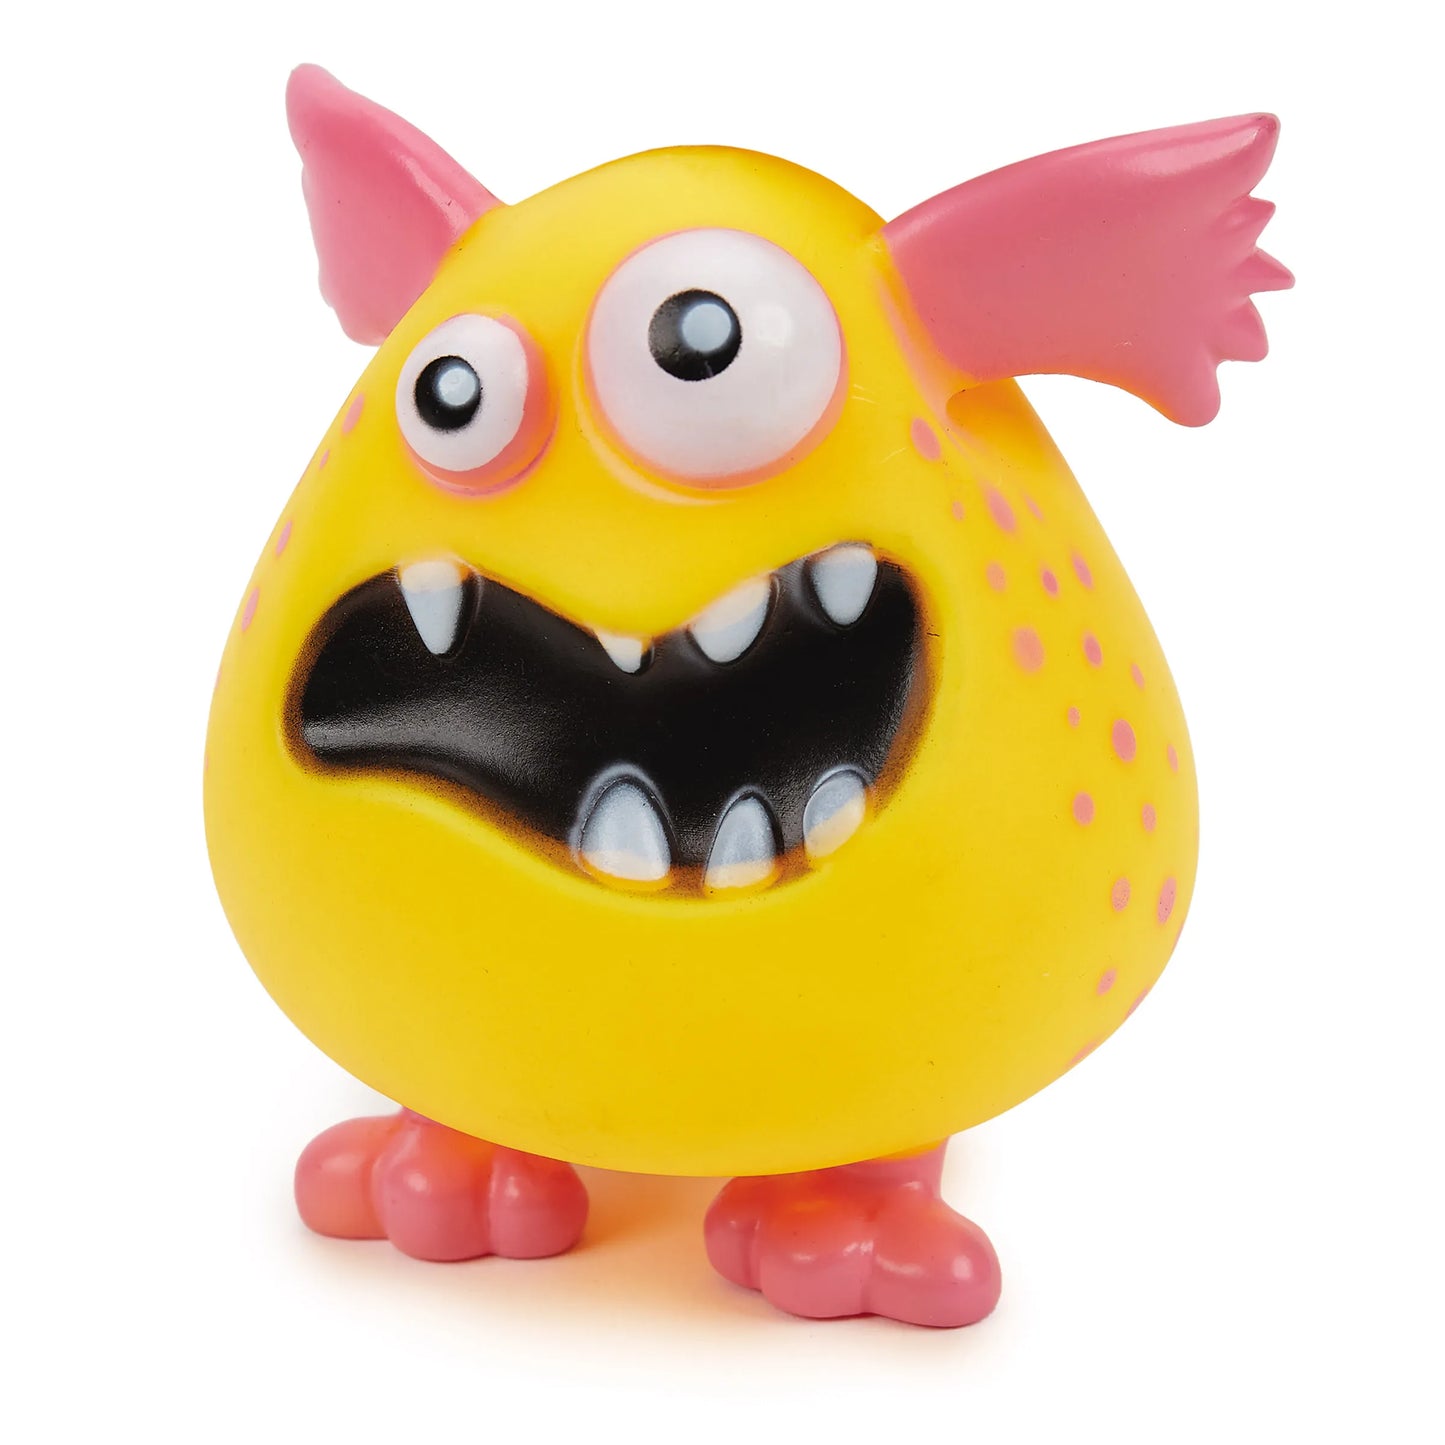 ZANIES PINK HAIR MONSTER TOY